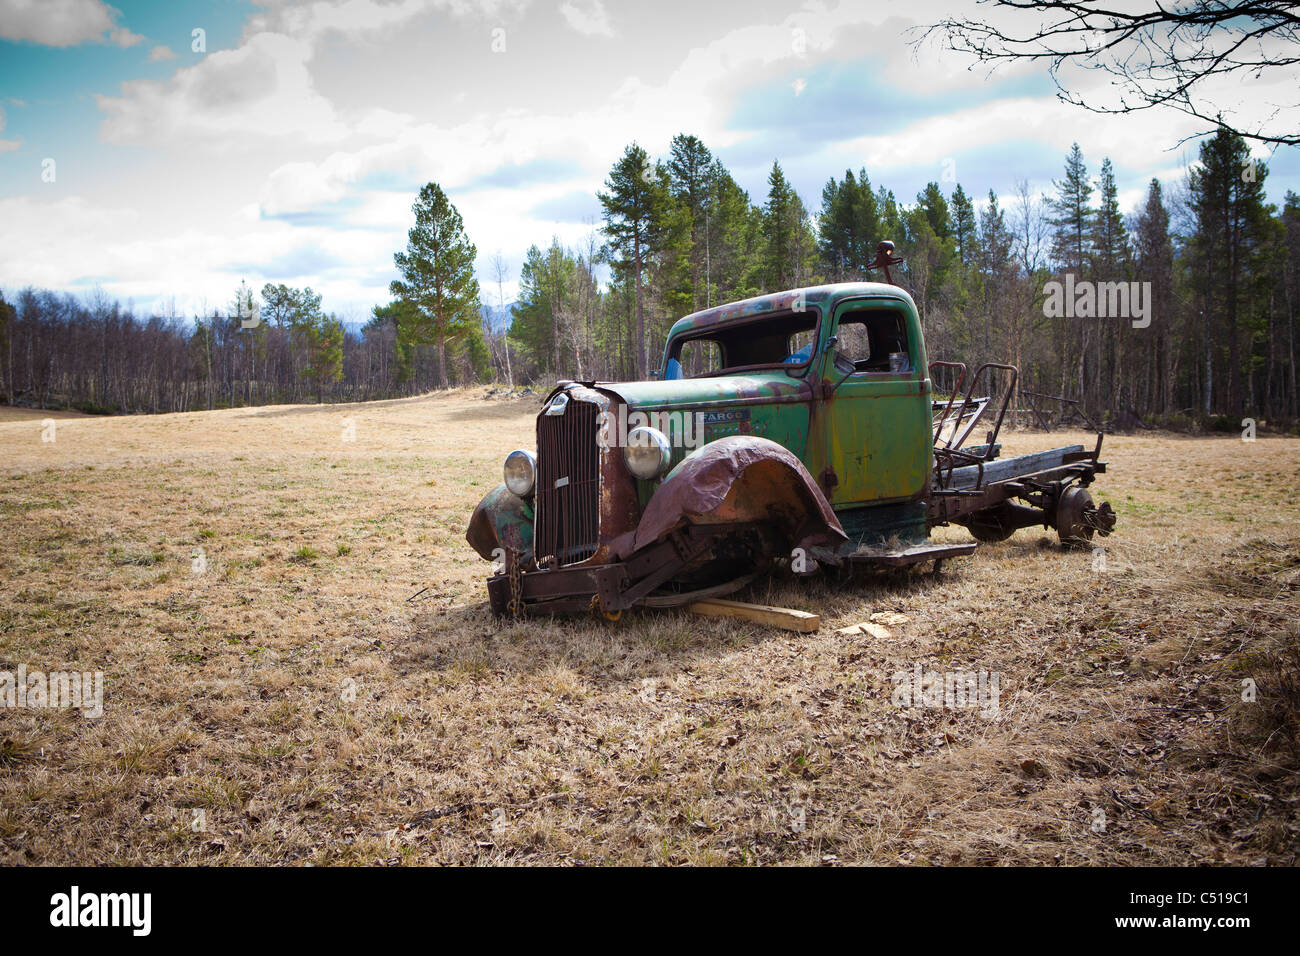 A rusted truck left in a barren field in the wilderness with looming in clouds Stock Photo